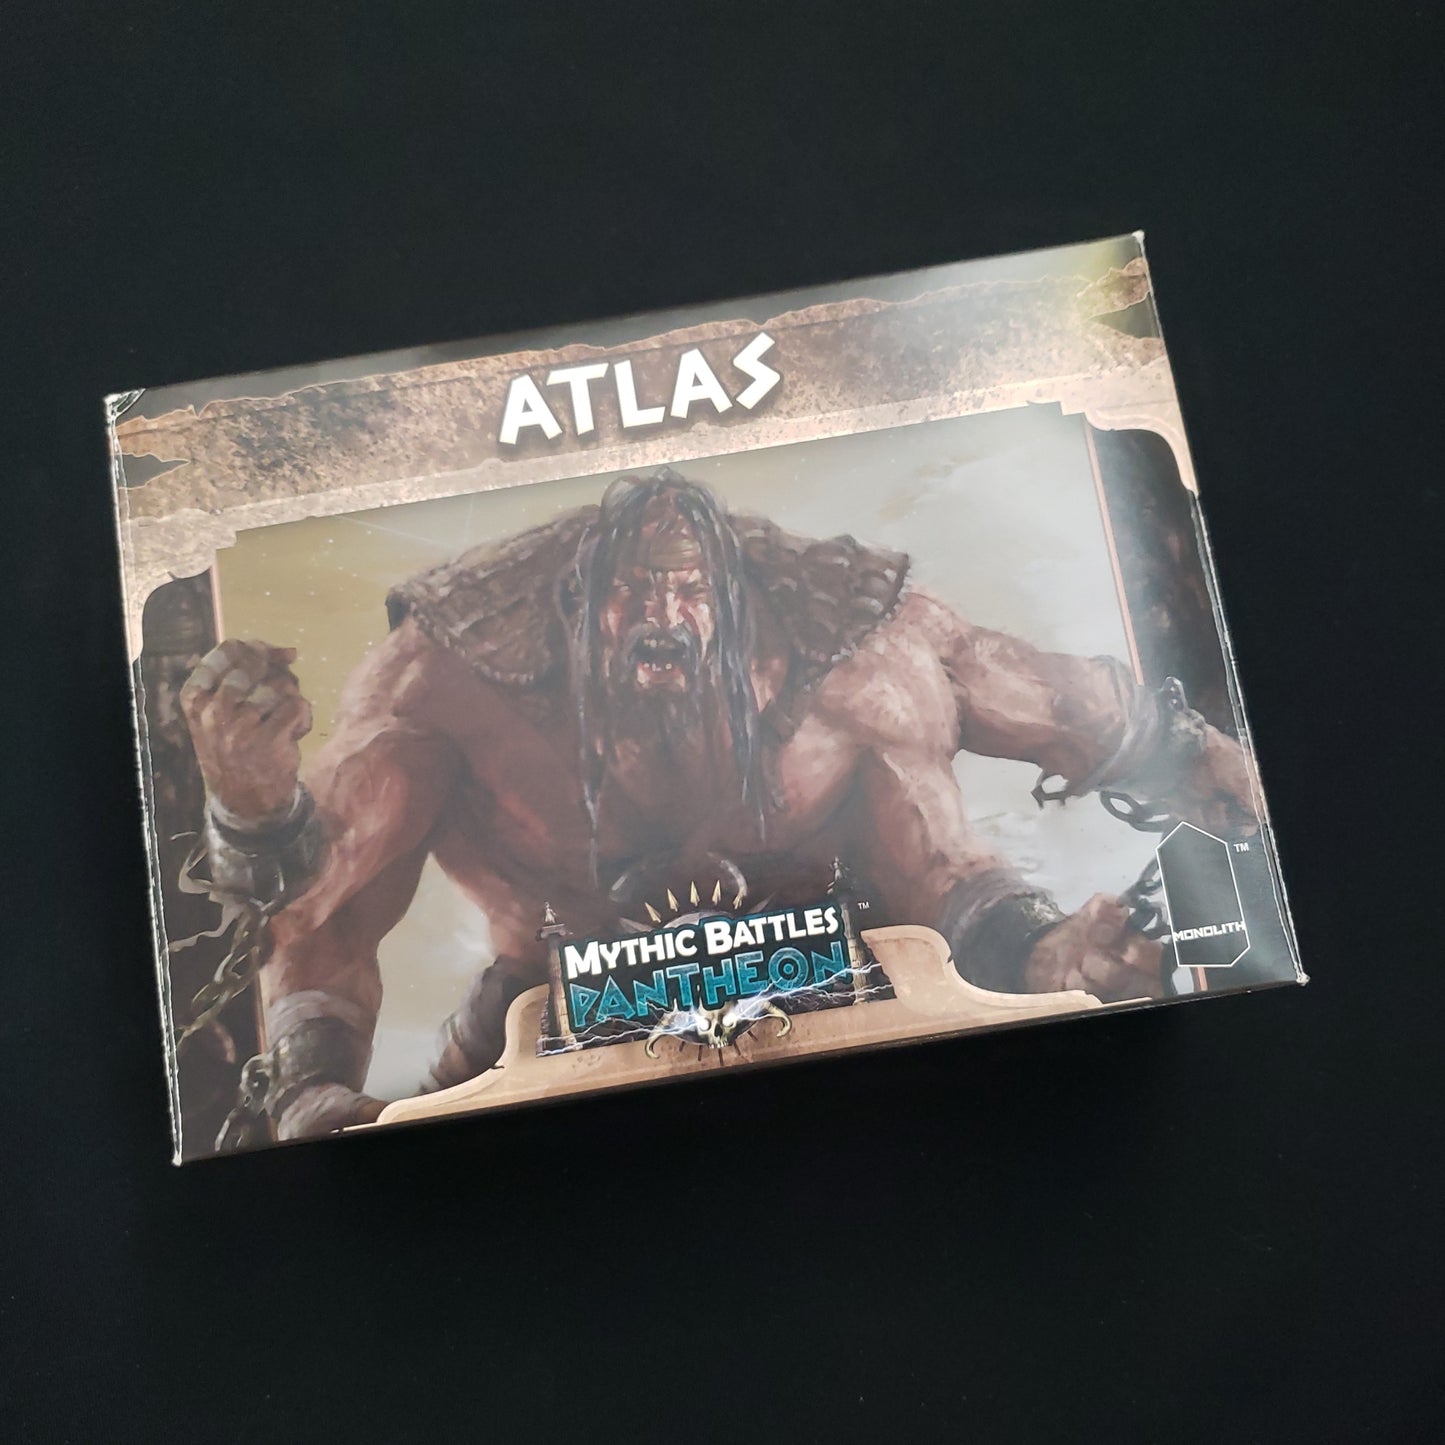 Image shows the front cover of the box of the Atlas expansion for the Mythic Battles Pantheon board game